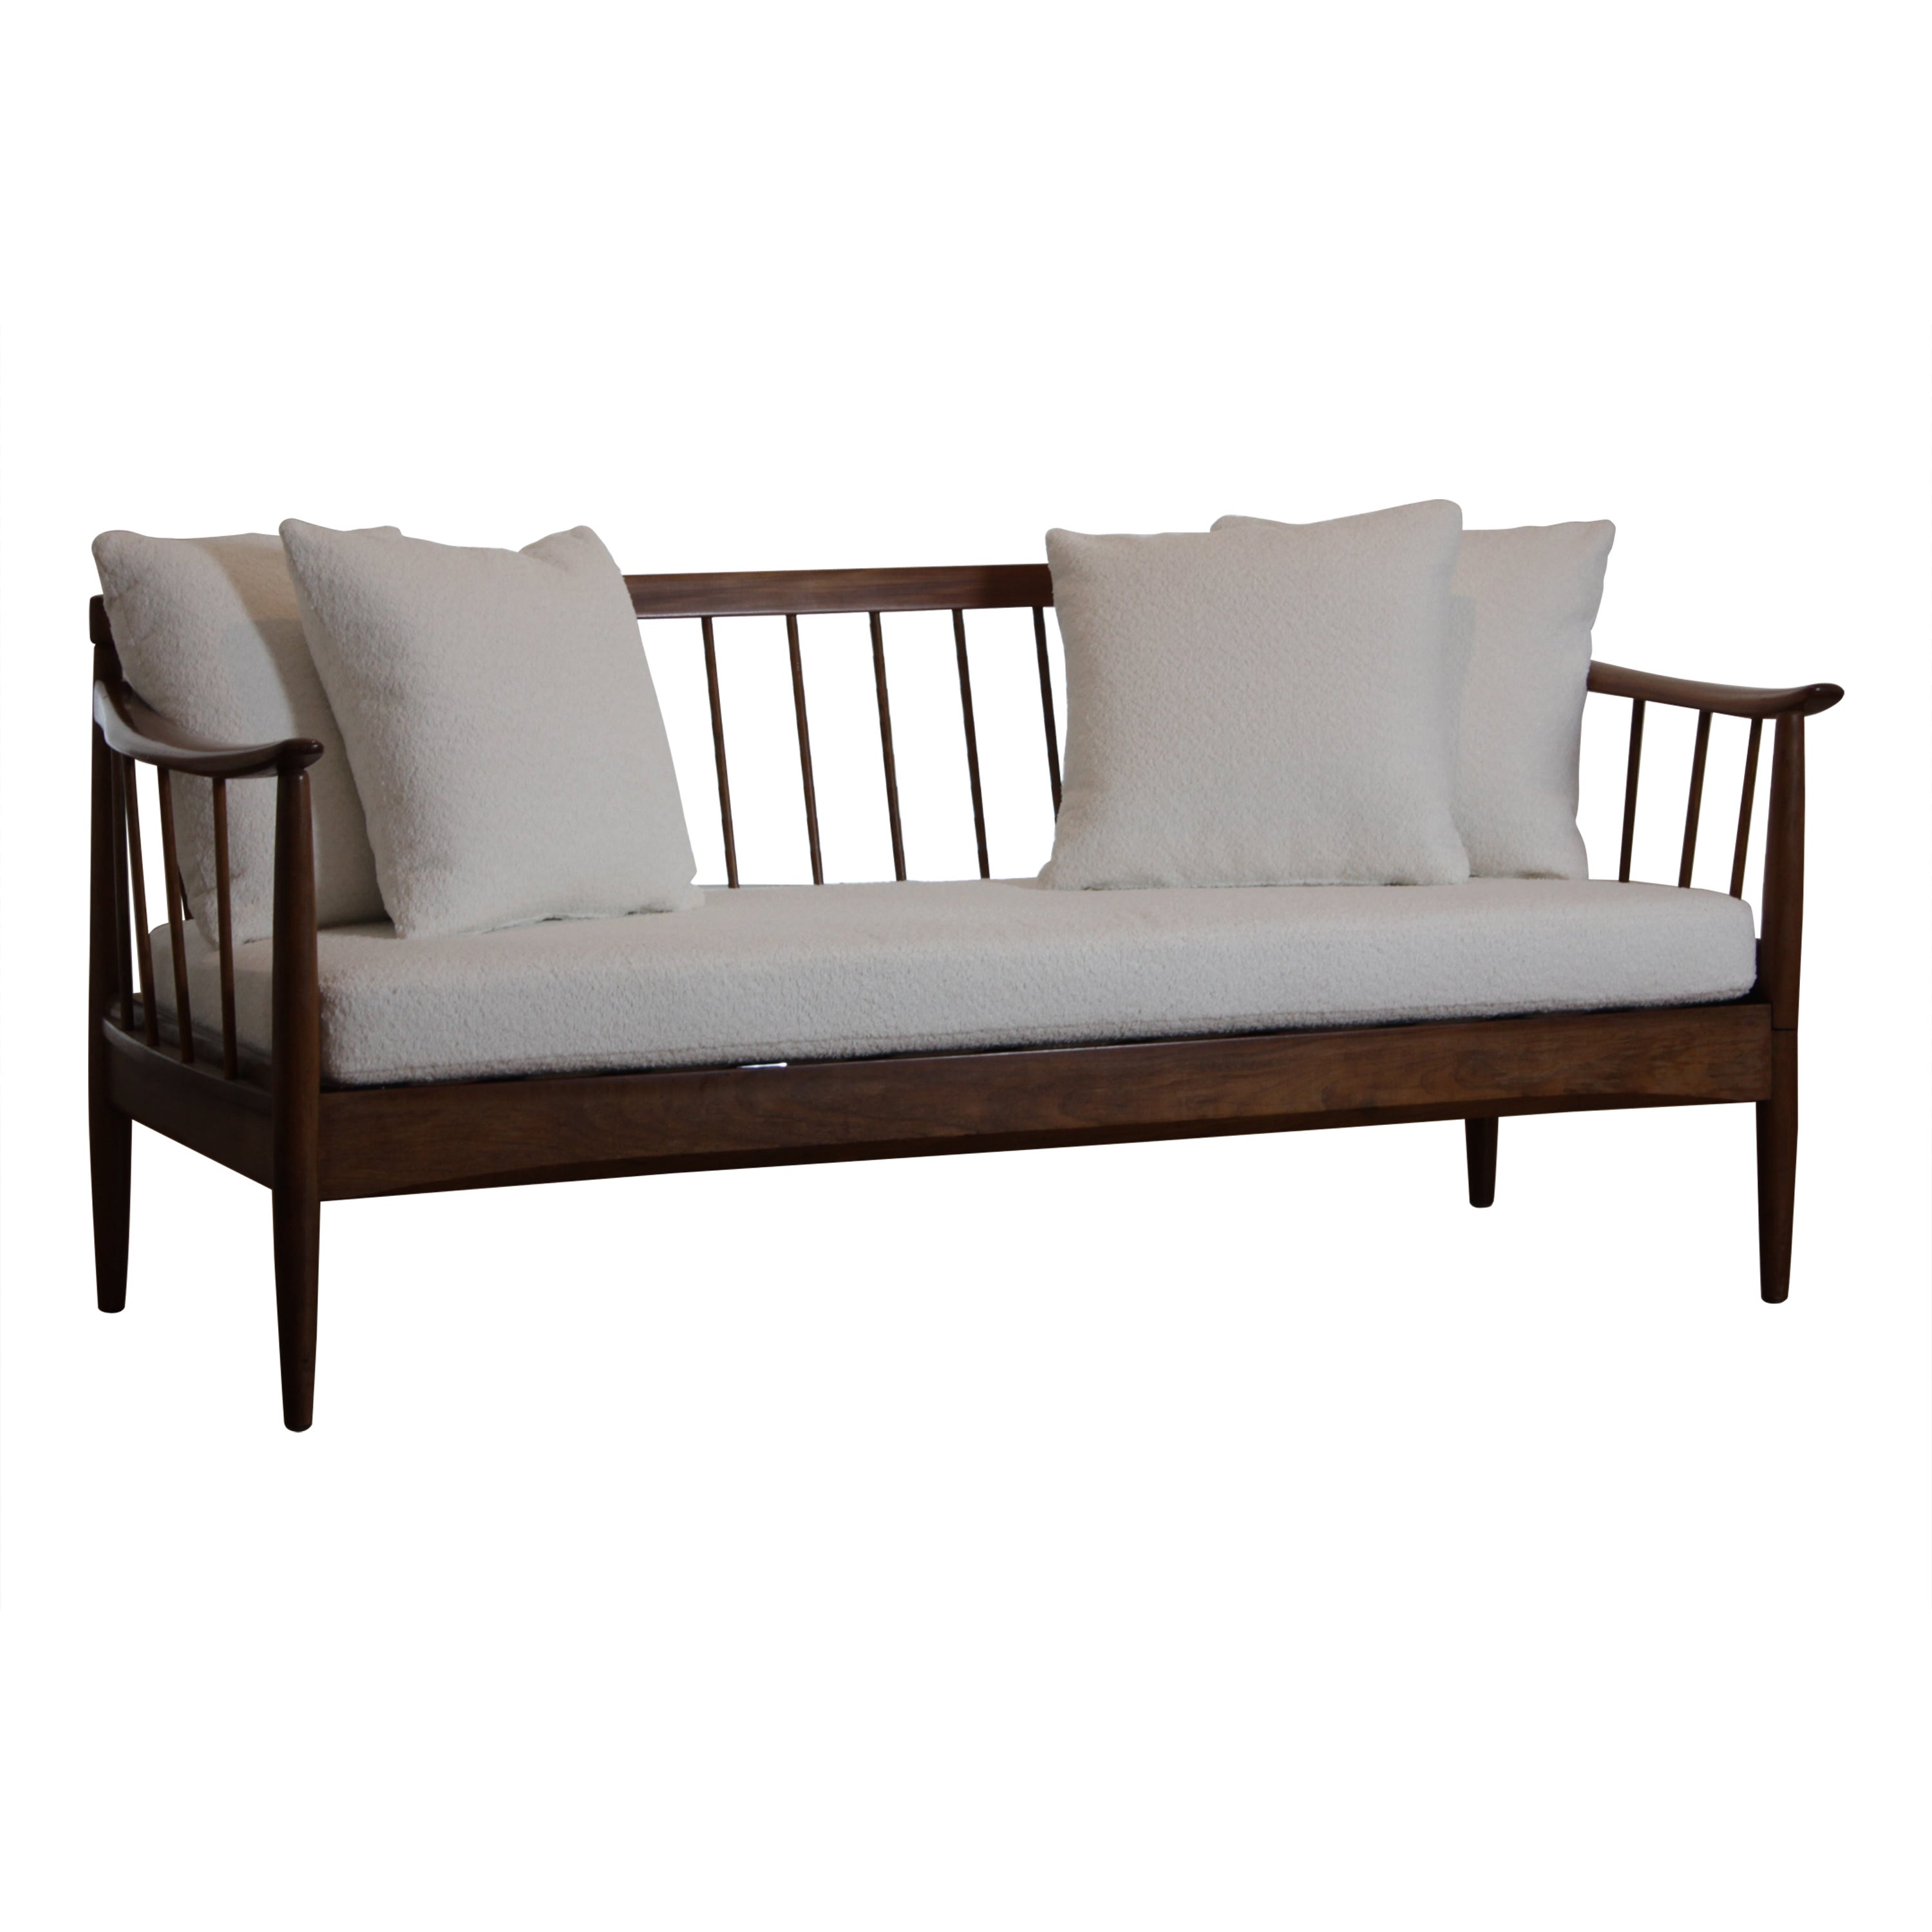 Mid 20th Century Modern Daybed by Greaves & Thomas, 1960s For Sale